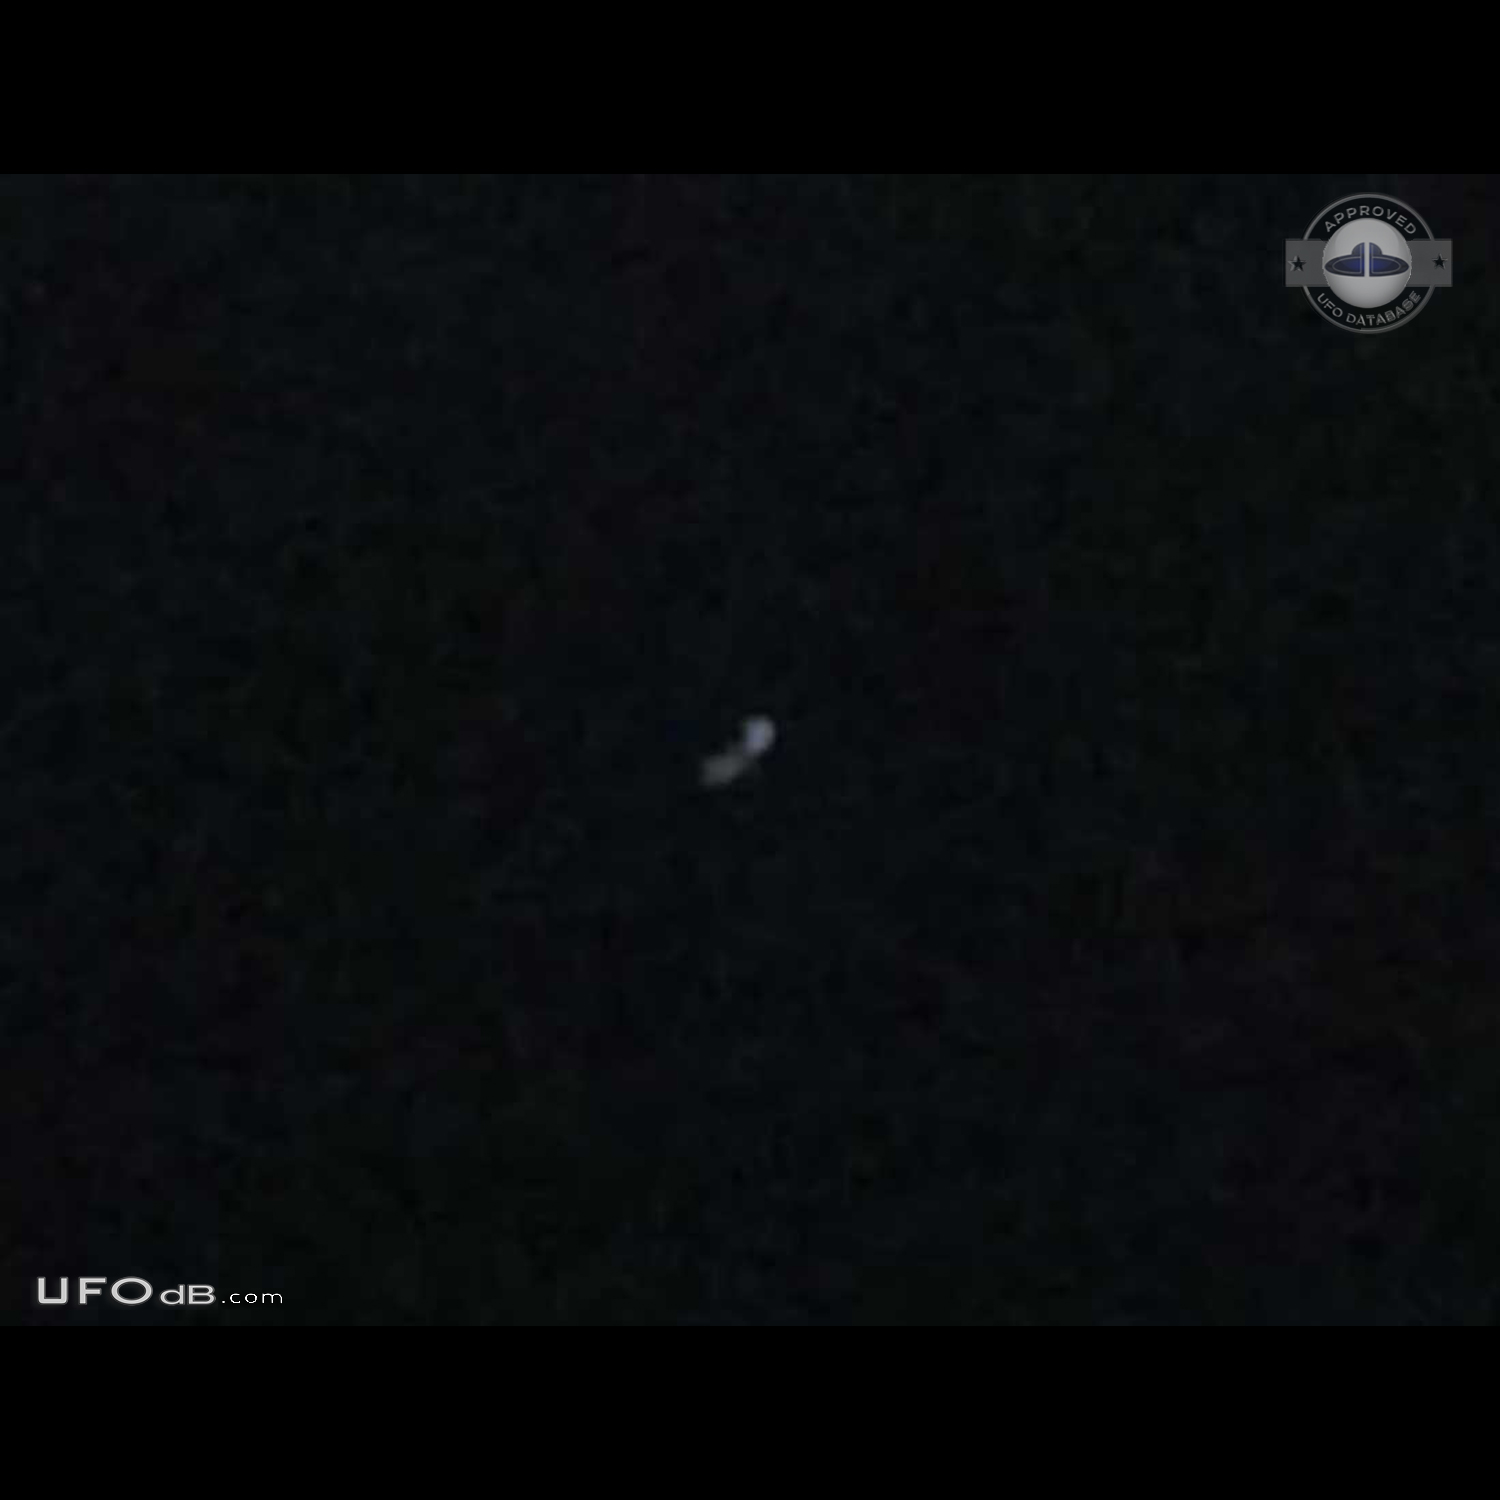 Multi week sightings of same UFO over multiple hours each night - Flor UFO Picture #775-1